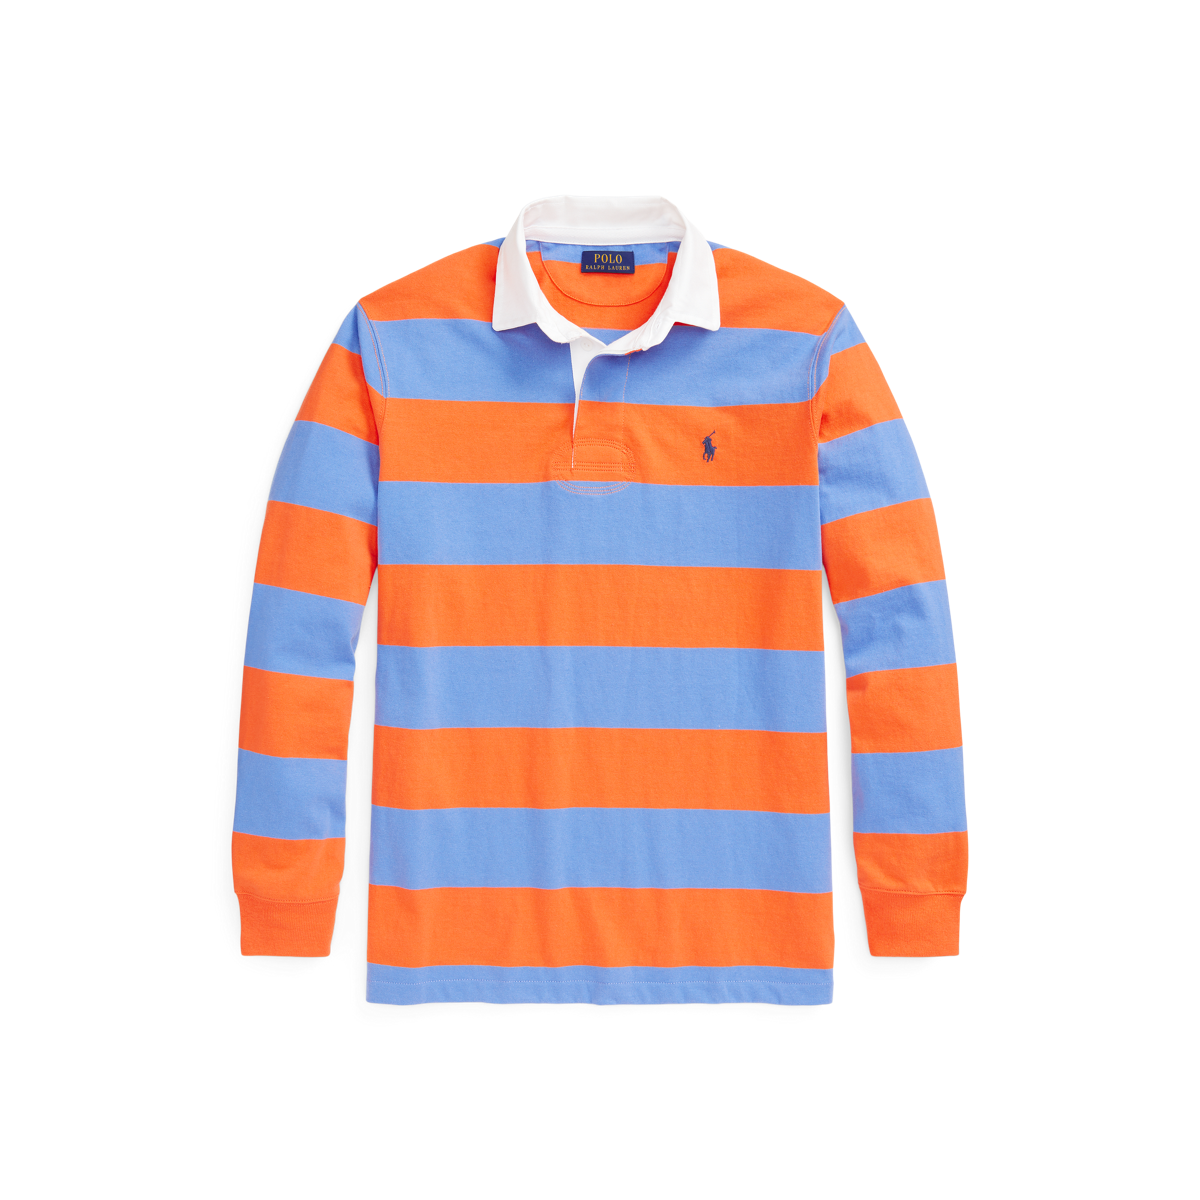 The Iconic Rugby Shirt | Ralph Lauren